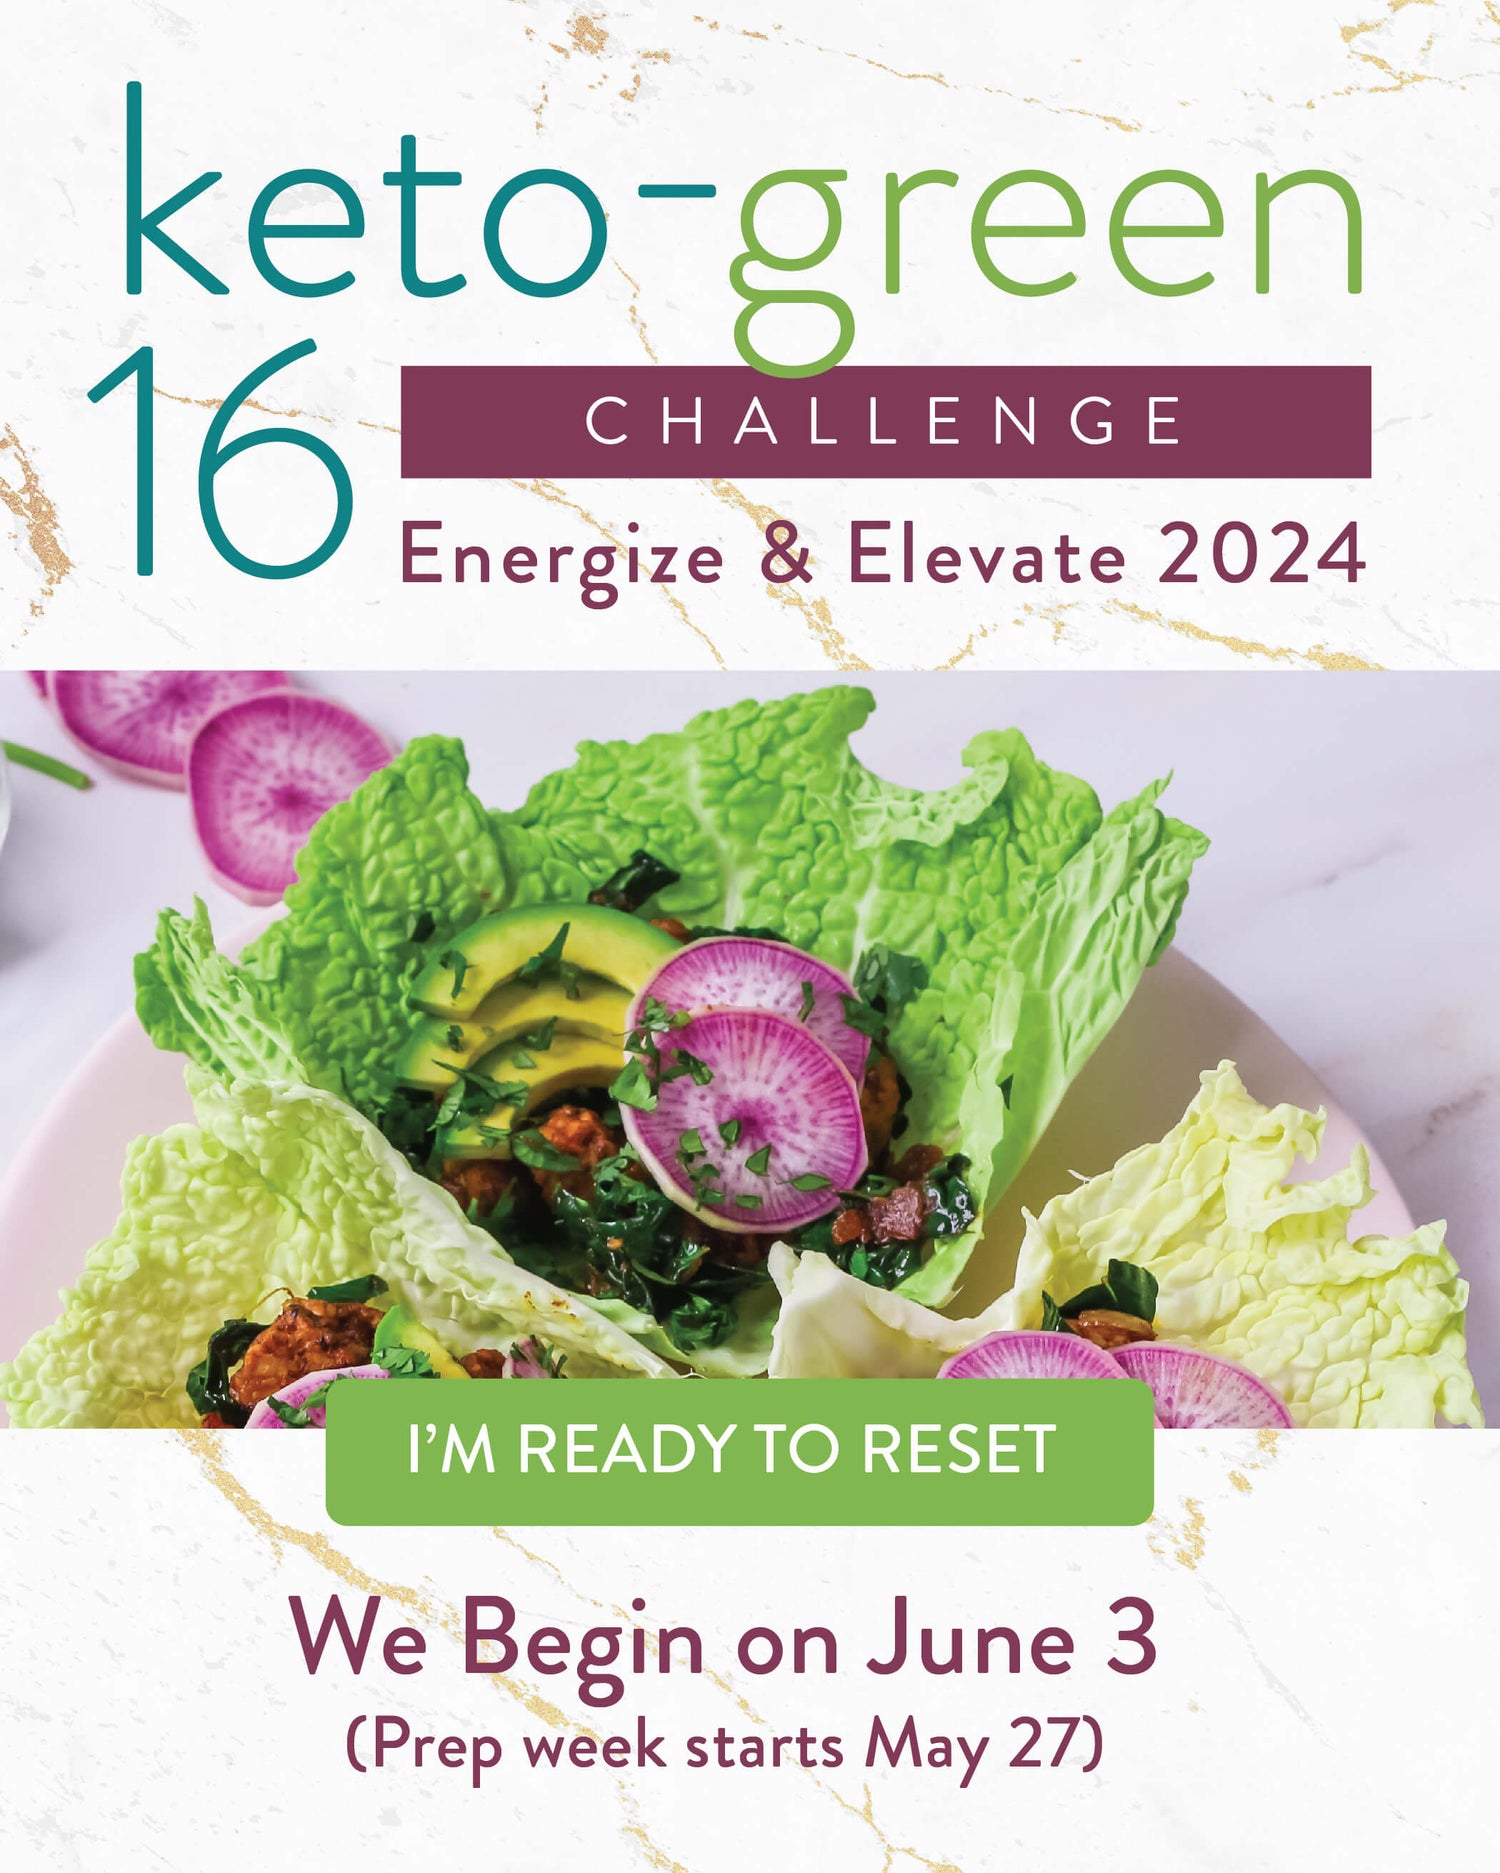 Keto Green Challenge Energize and Elevate 2024